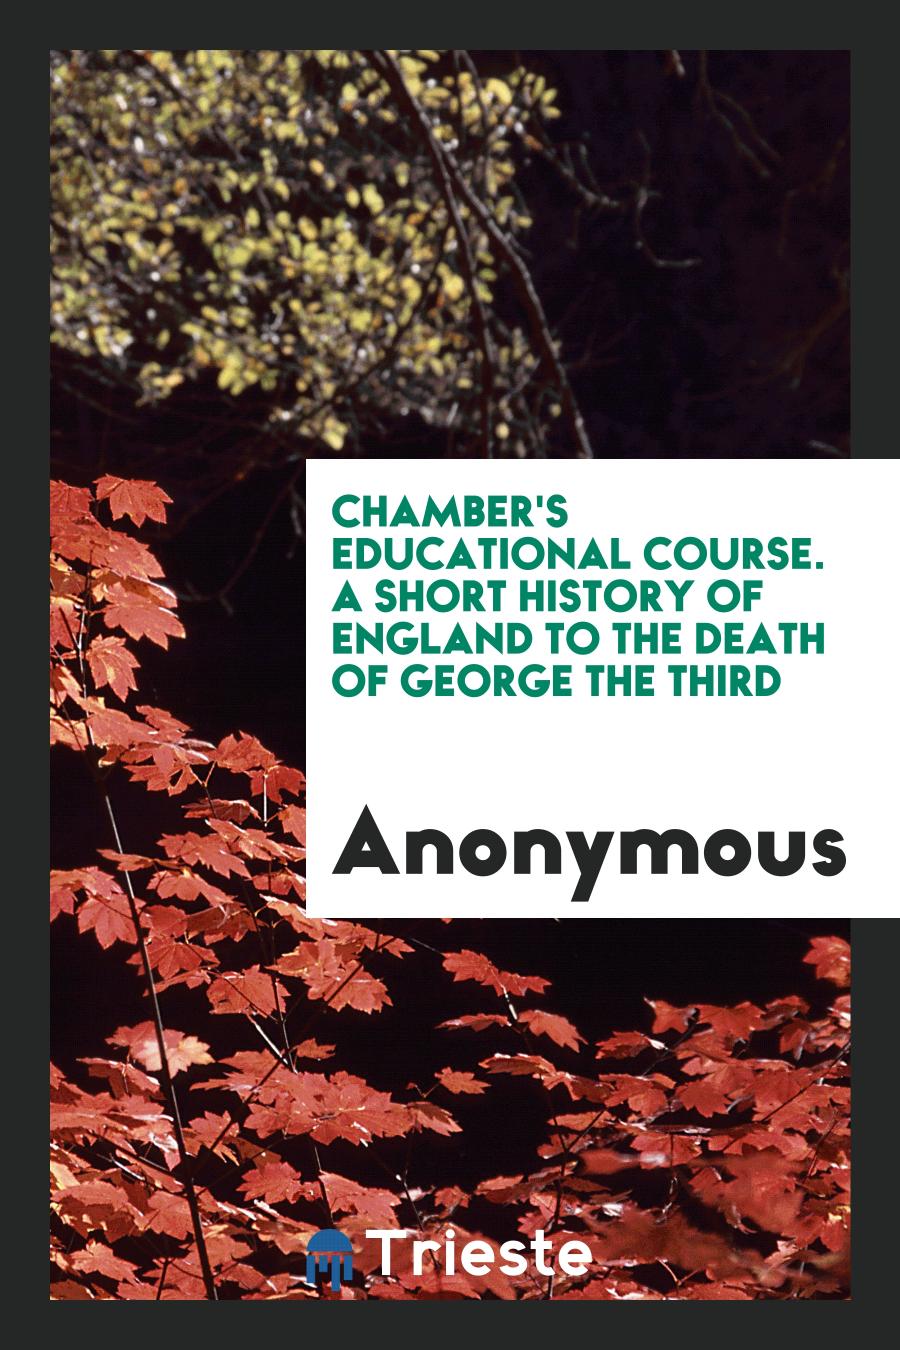 Chamber's Educational Course. A Short History of England to the Death of George the Third